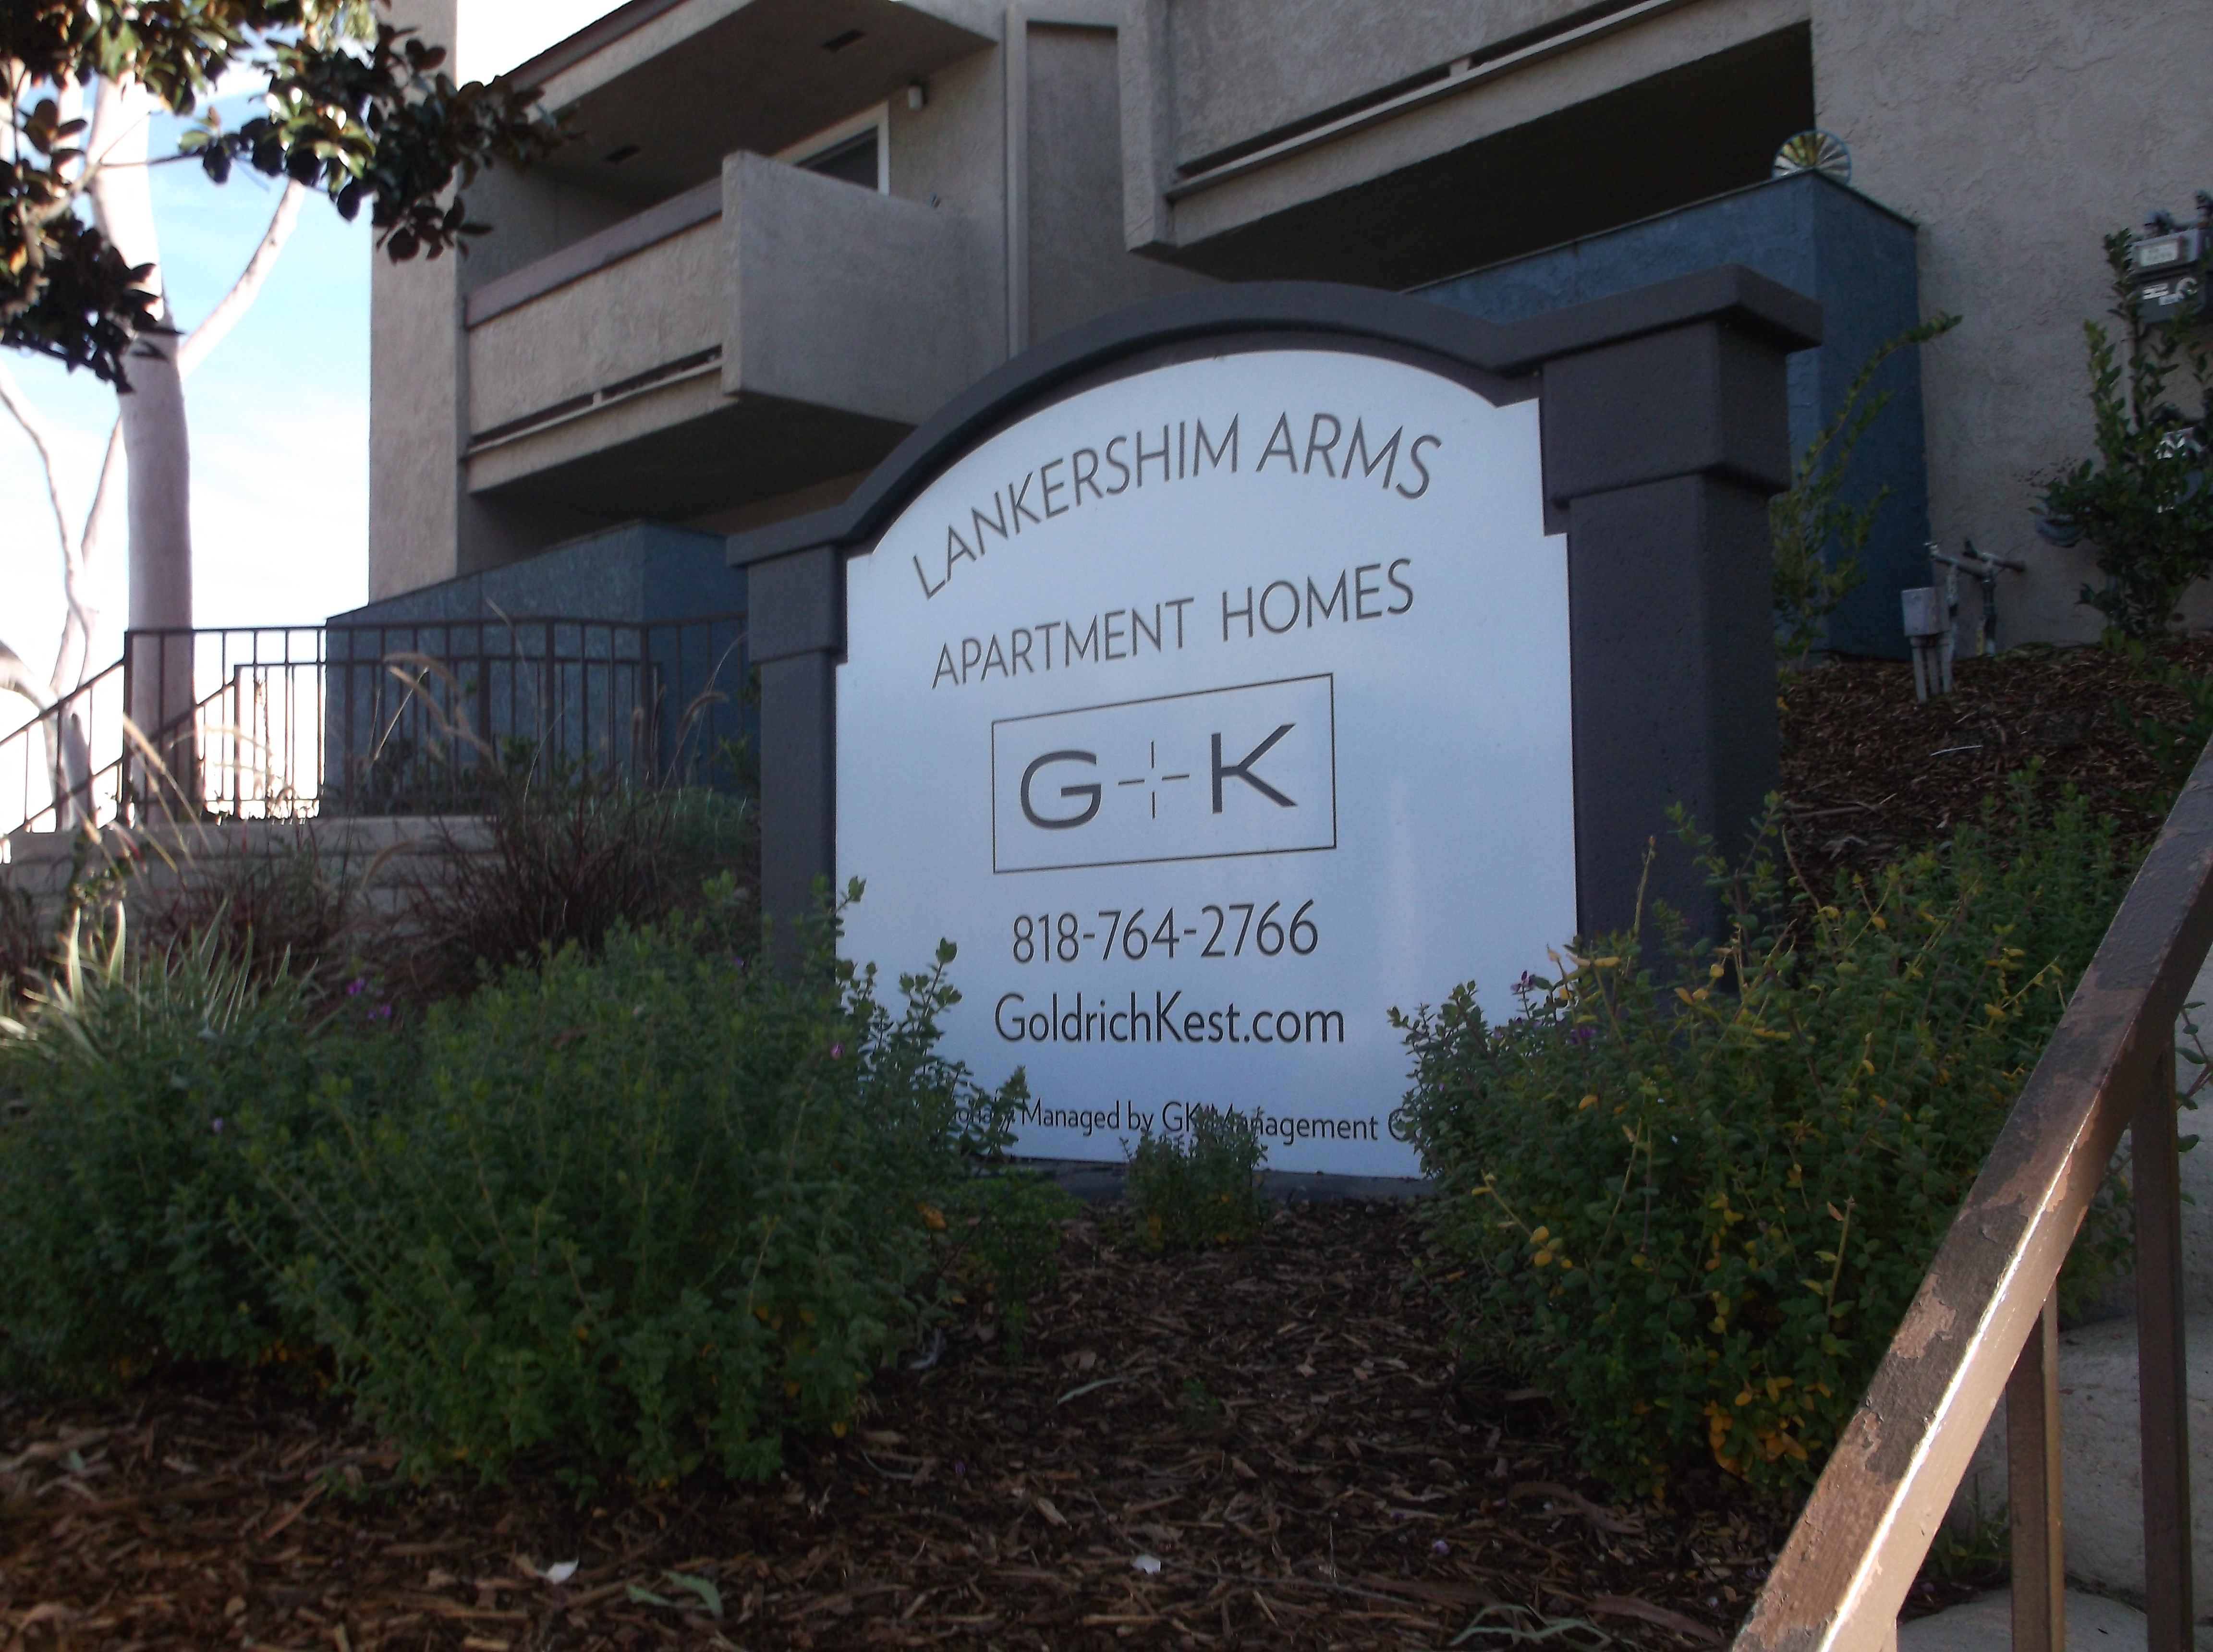 The front of Lankershim Arms Apartments showing the Goldrich Kest Management logo and phone number 818-764-2766